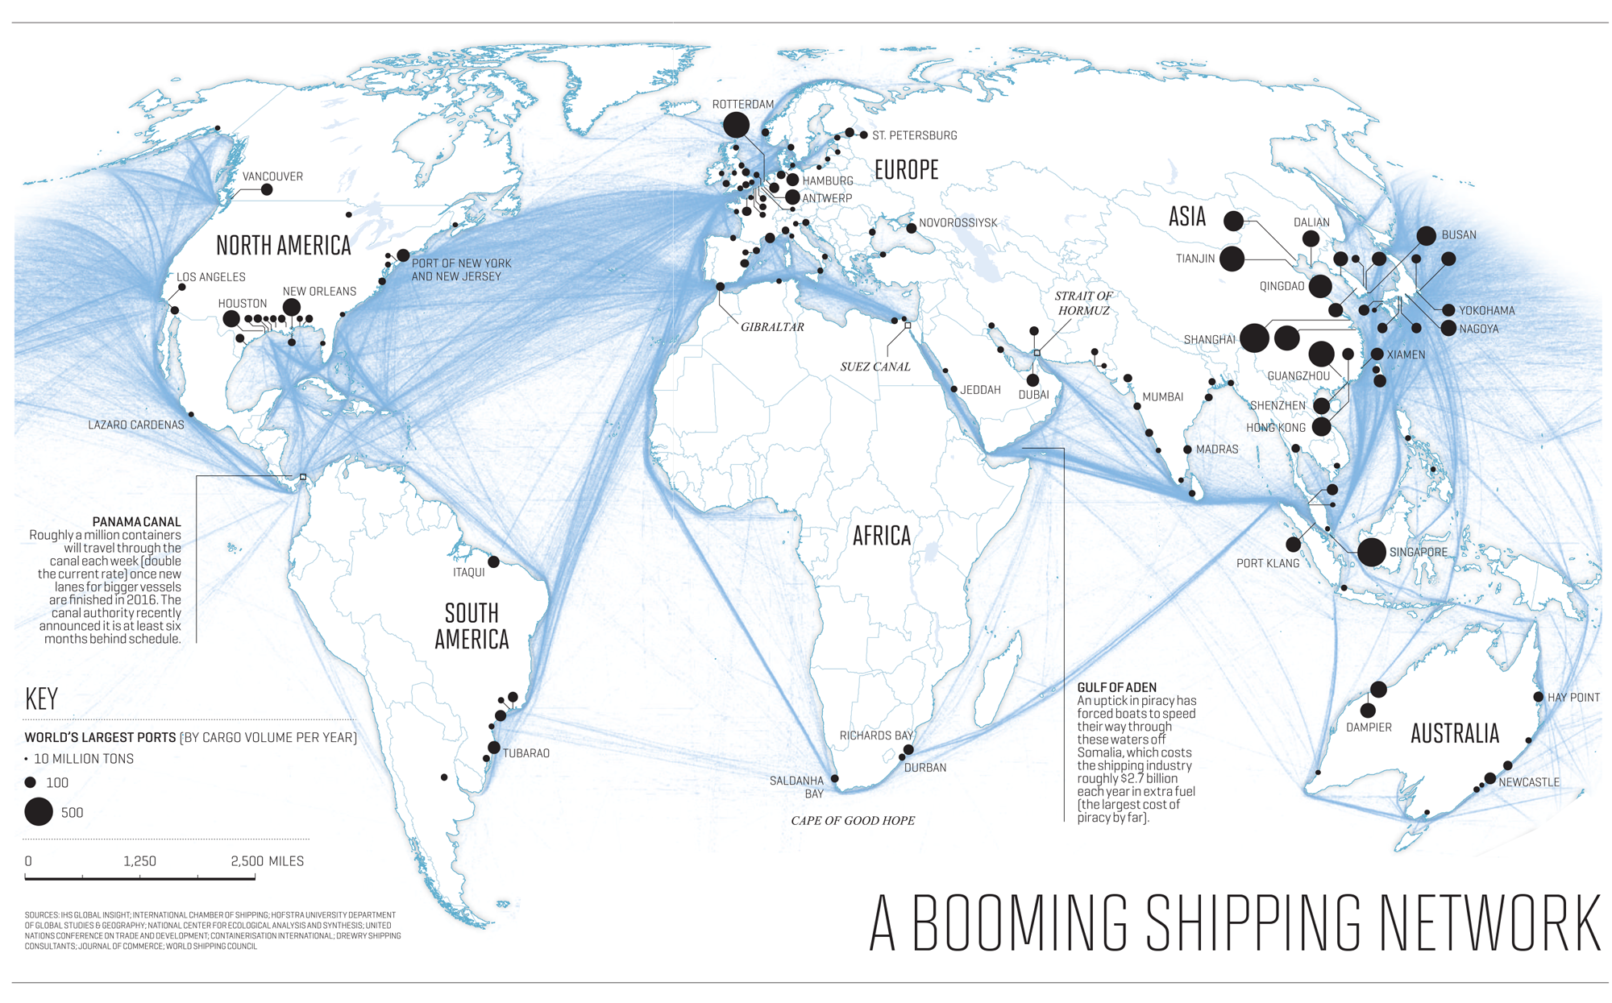 Shipping routes map